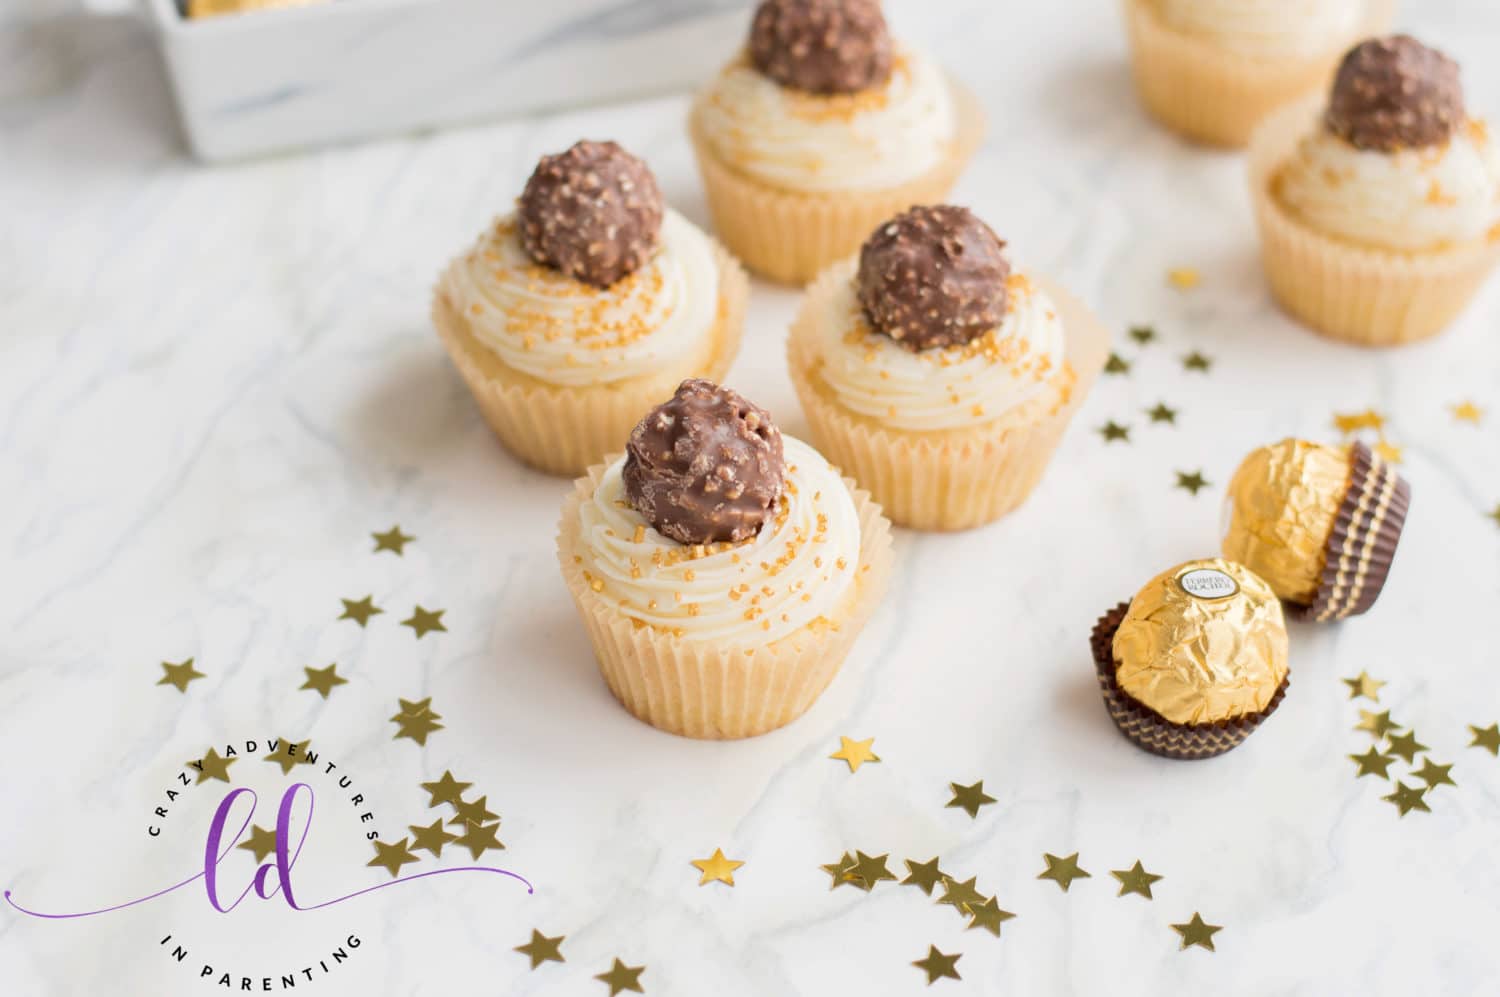 Top with Candy for Golden Ferrero Rocher New Year's Eve Cupcakes